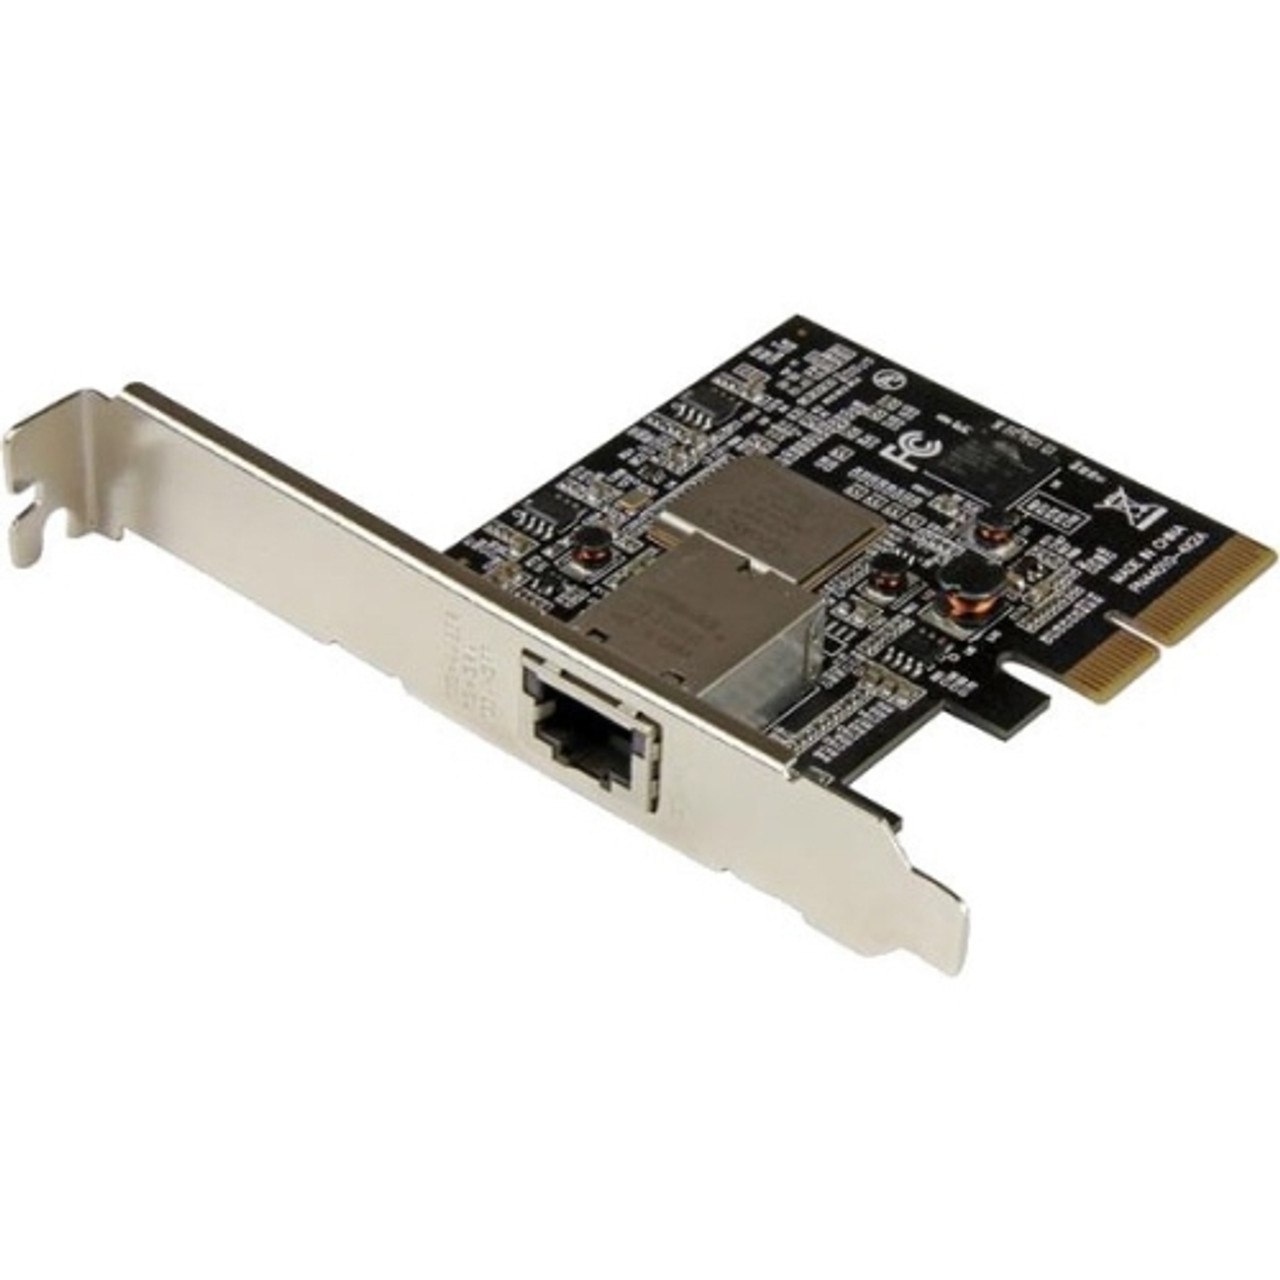 ST10GSPEXNB StarTech 1 Port PCI Express 10GBase-T / NBASE-T Ethernet Network Card 5-Speed Network Support: 10G/5G/2.5G/1G/100Mbps PCIe 2.0 x4